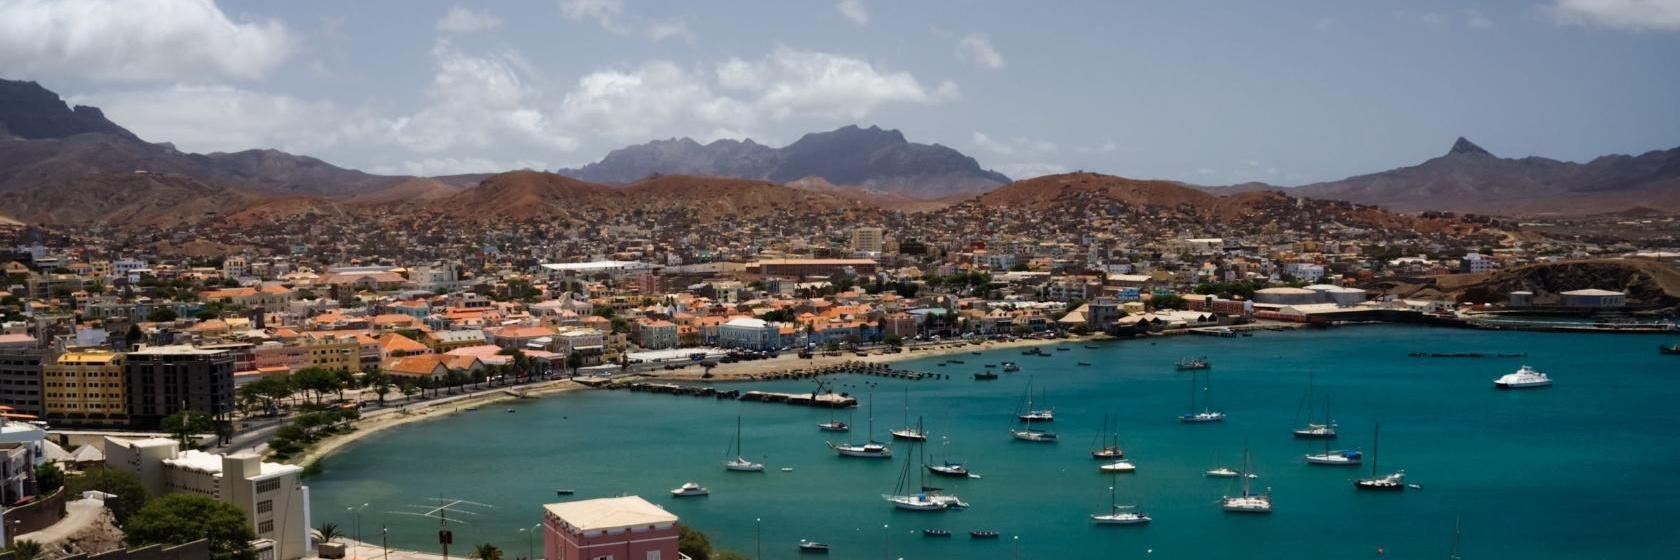 The 10 best hotels & places to stay in Mindelo, Cape Verde - Mindelo hotels